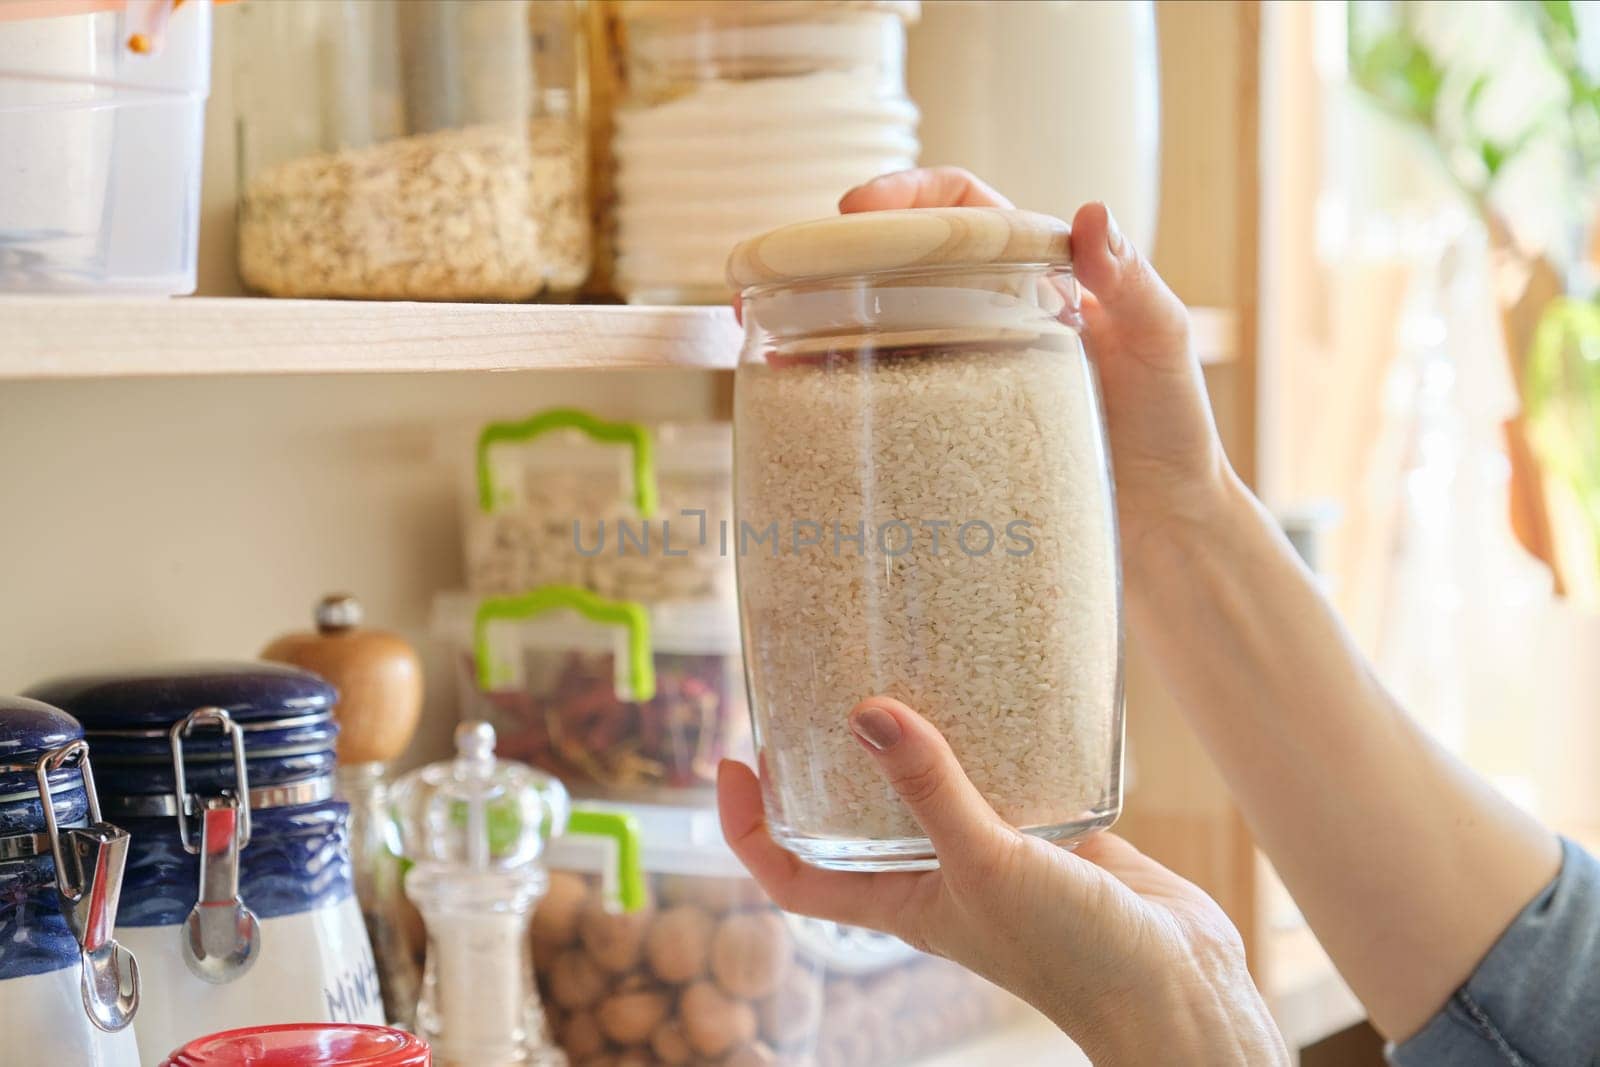 Food products in the kitchen storing ingredients in pantry. Woman taking jar of rice